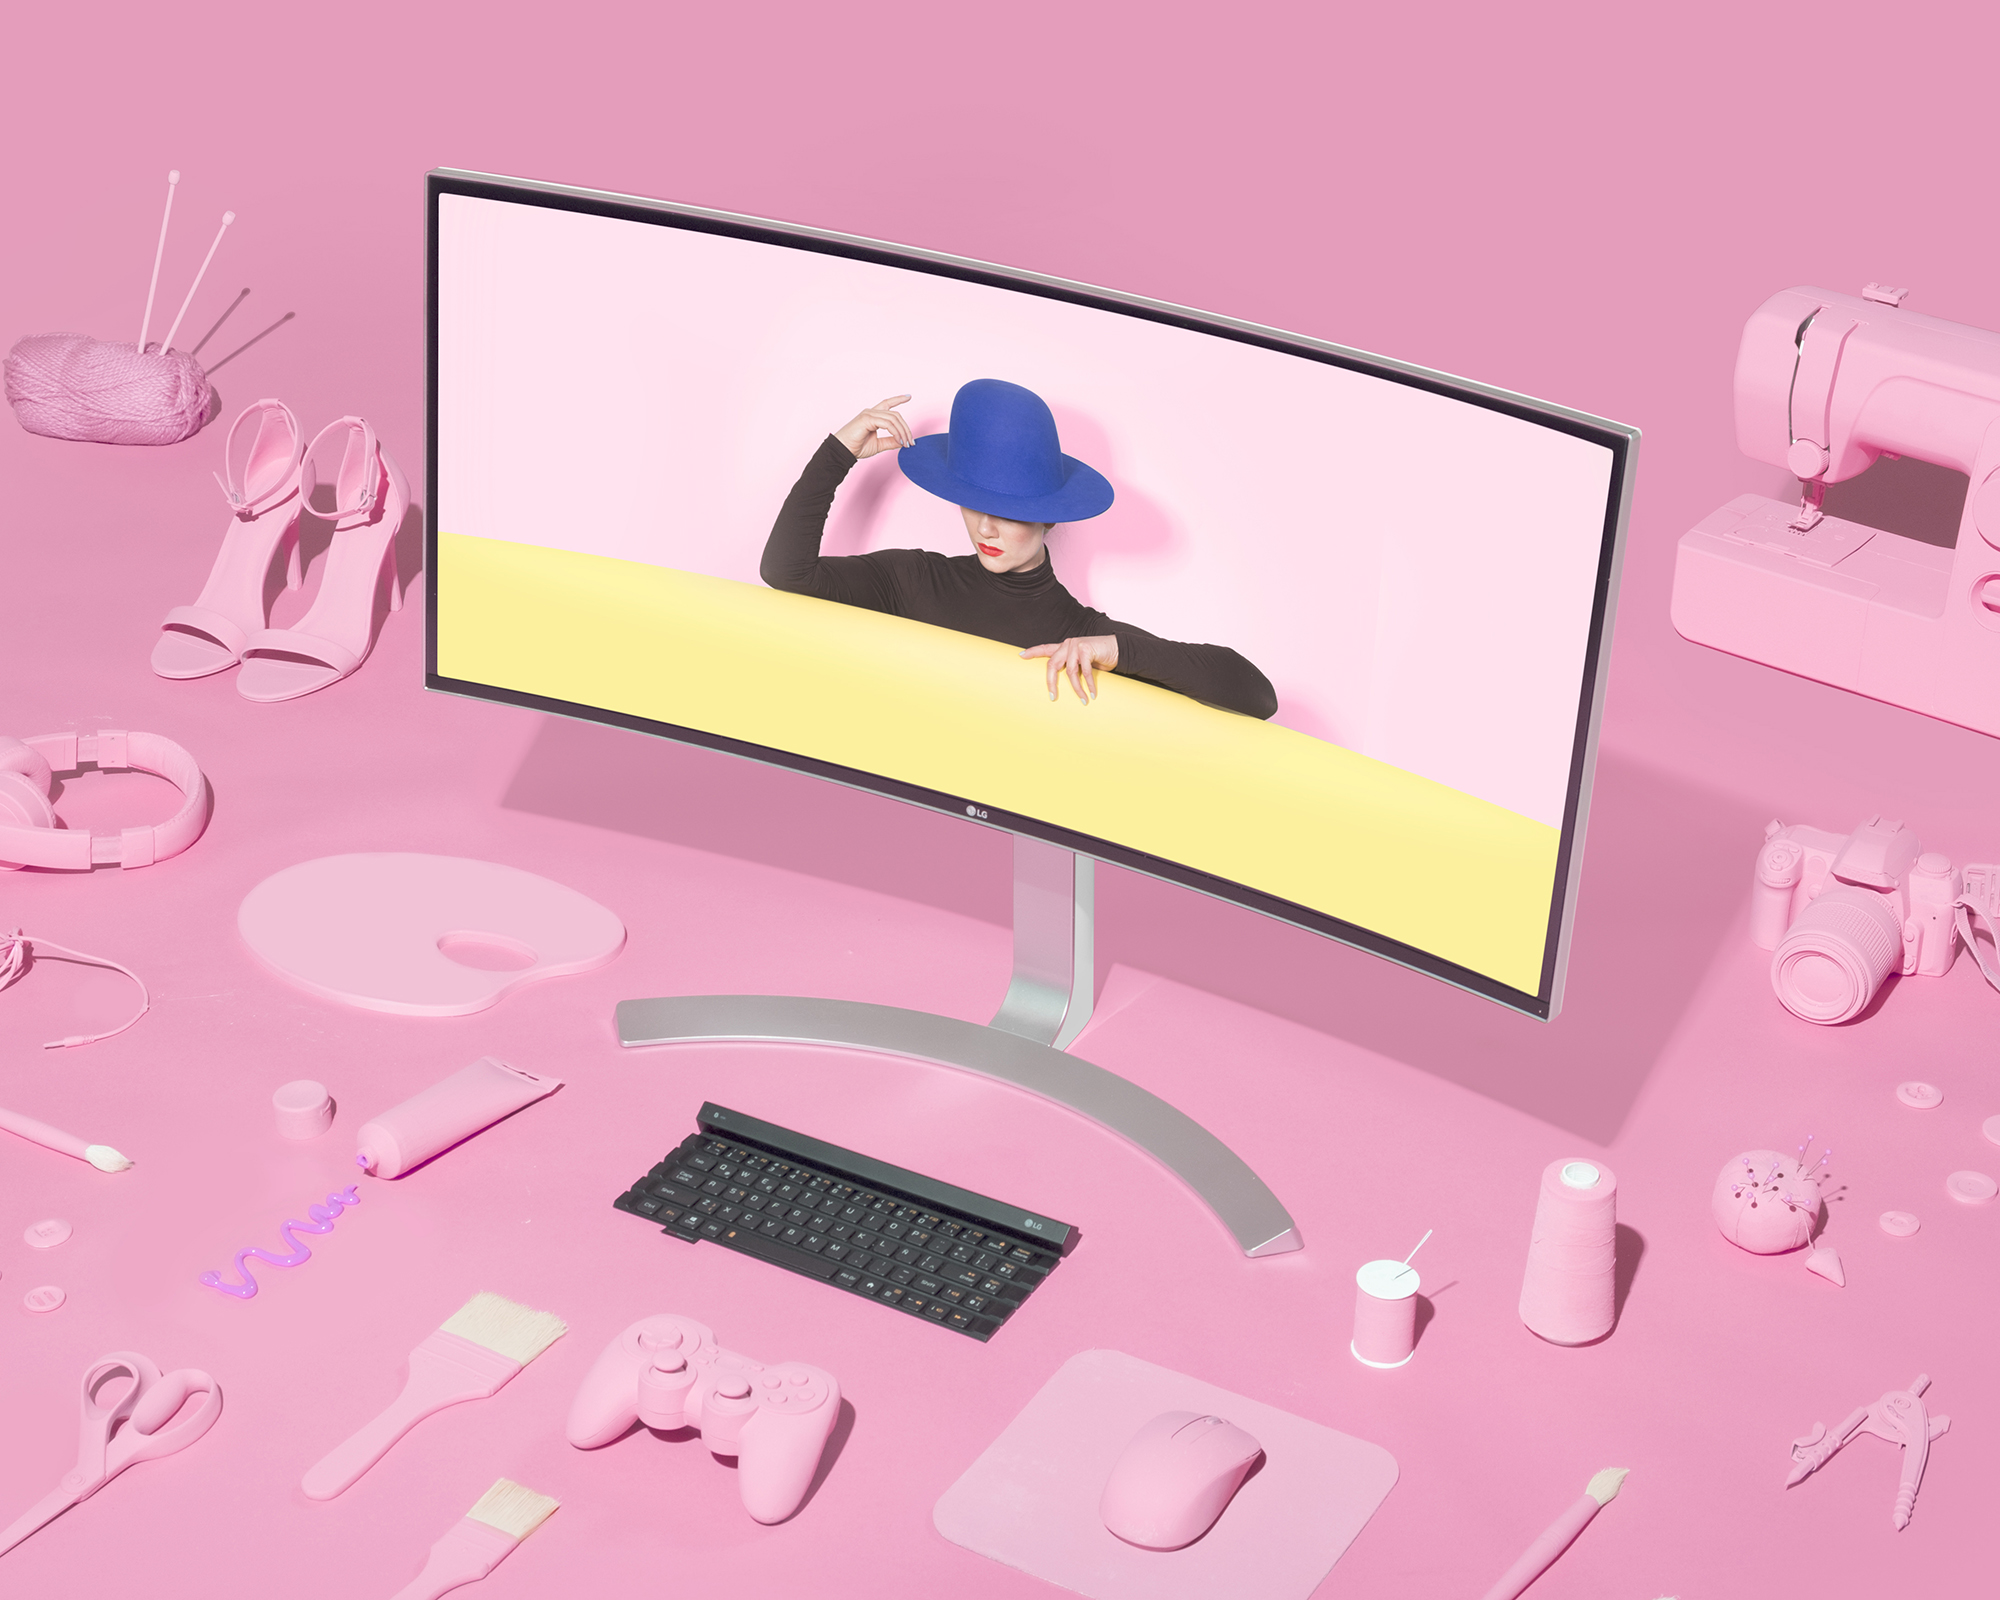 parsons + lg ultrawide academy, pink fashion accessories, art by littledrill